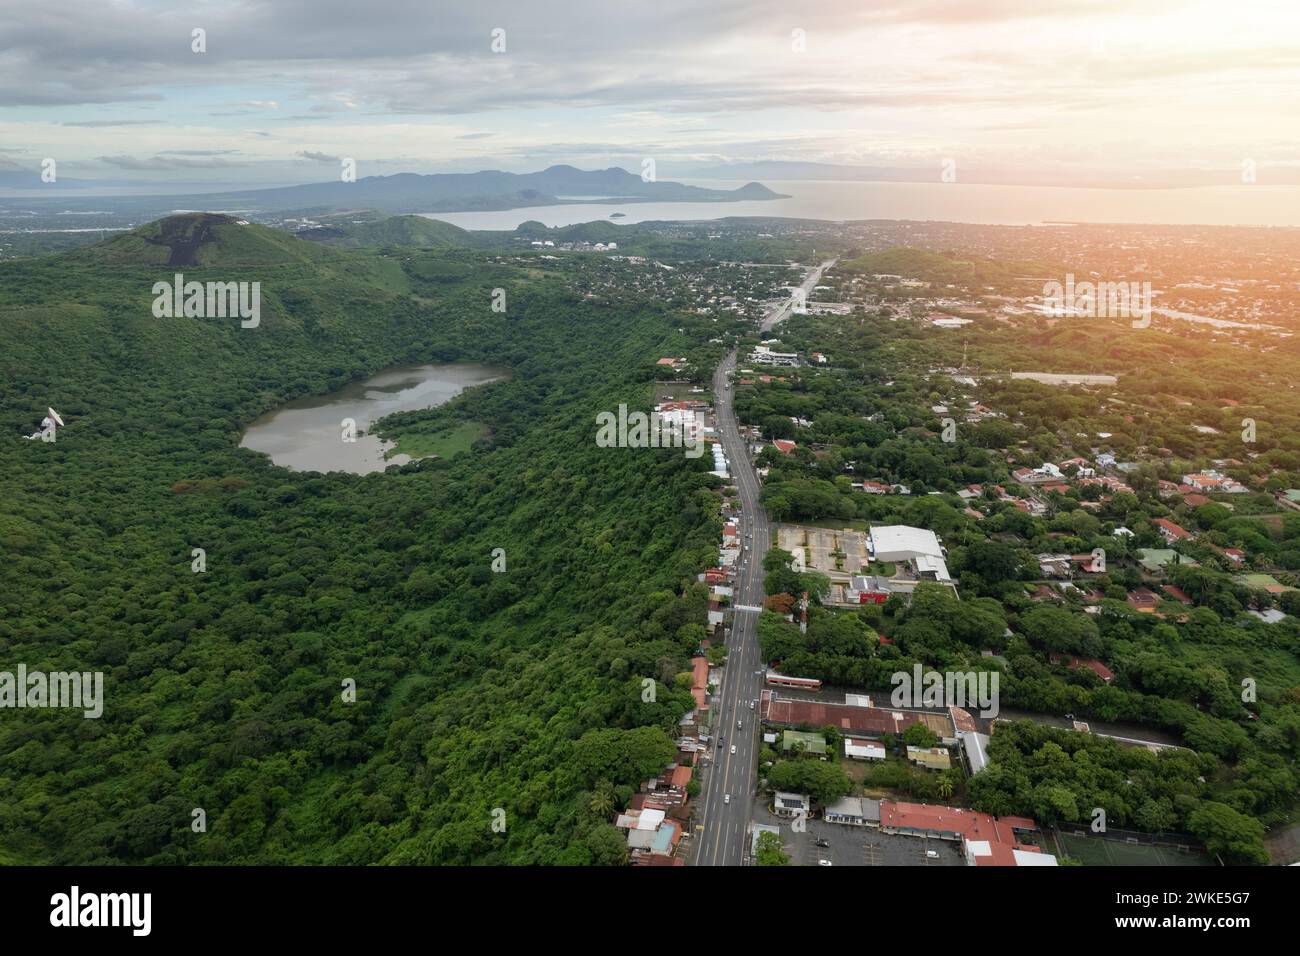 Central america Nicaragua country background aerial drone capital Managua view Stock Photo